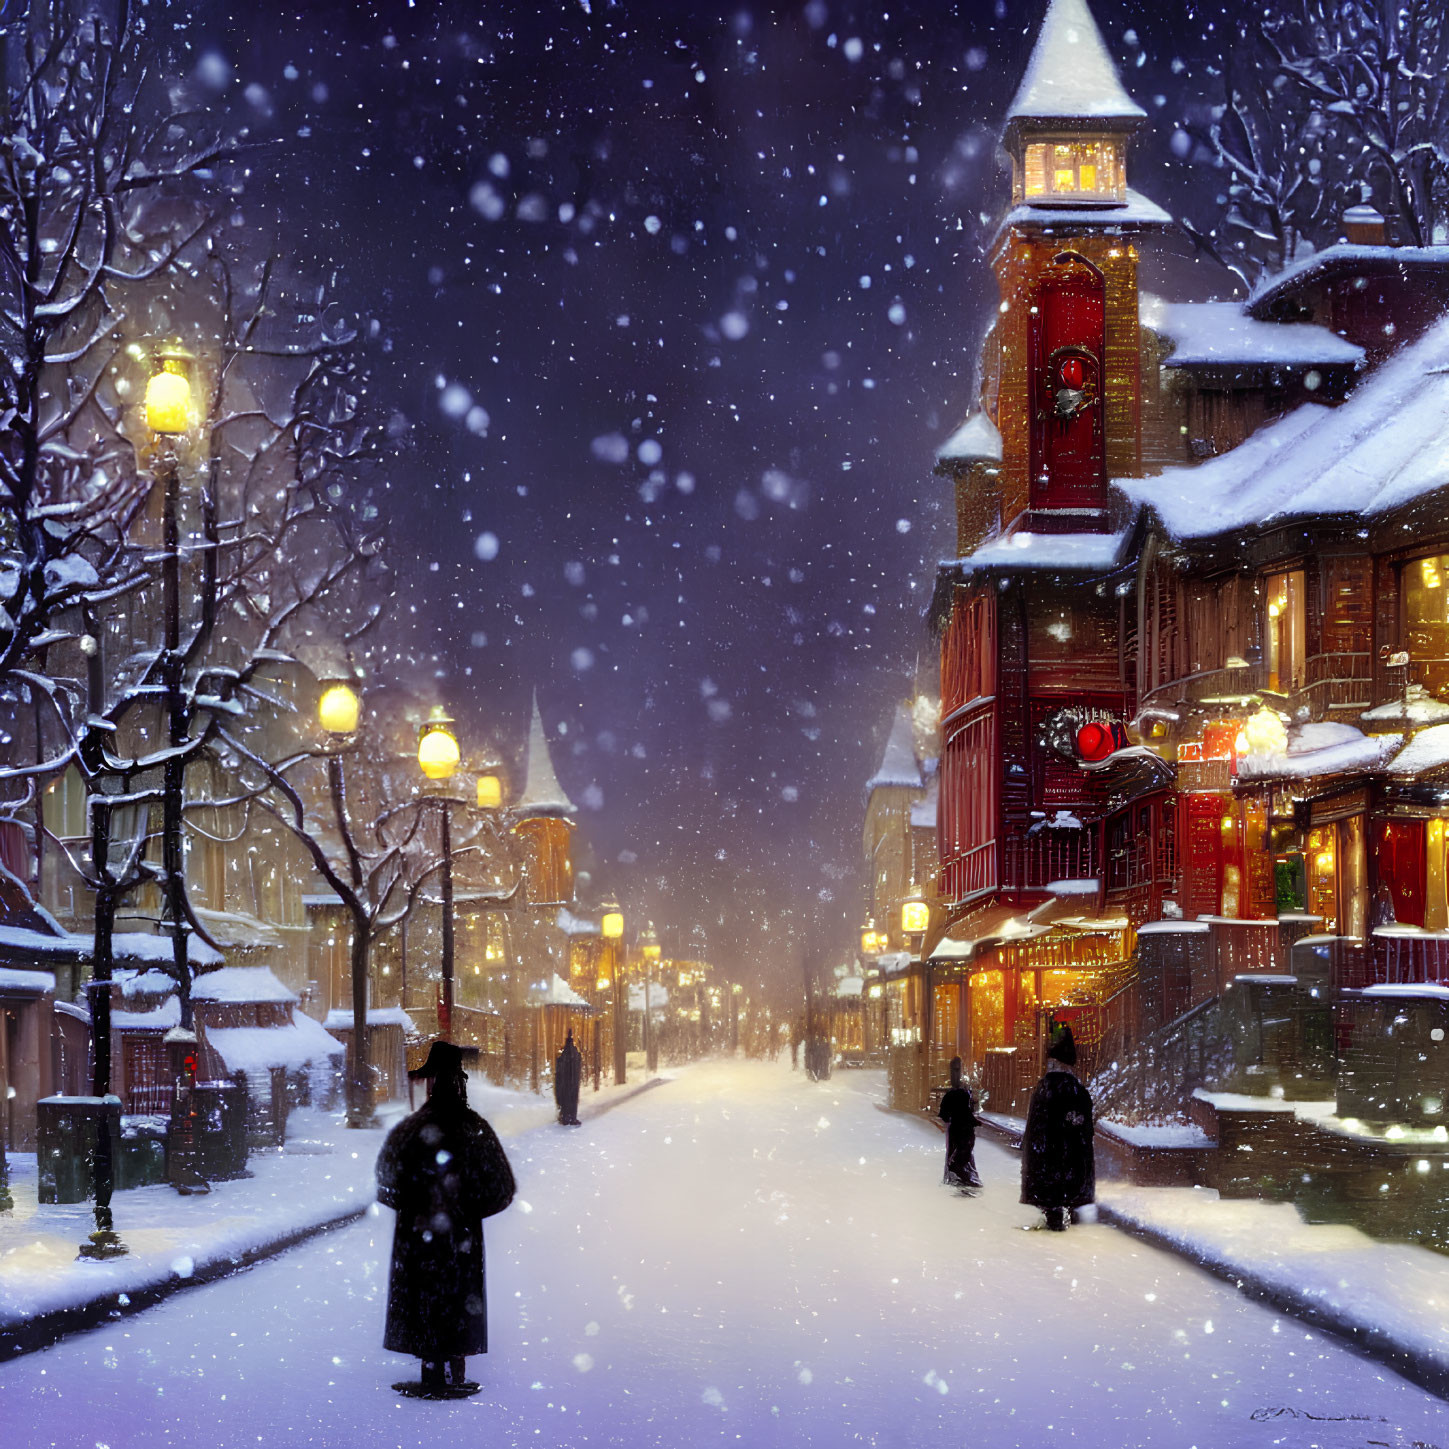 Snowy Evening Scene: Charming Town with Snowfall and Red Clock Tower